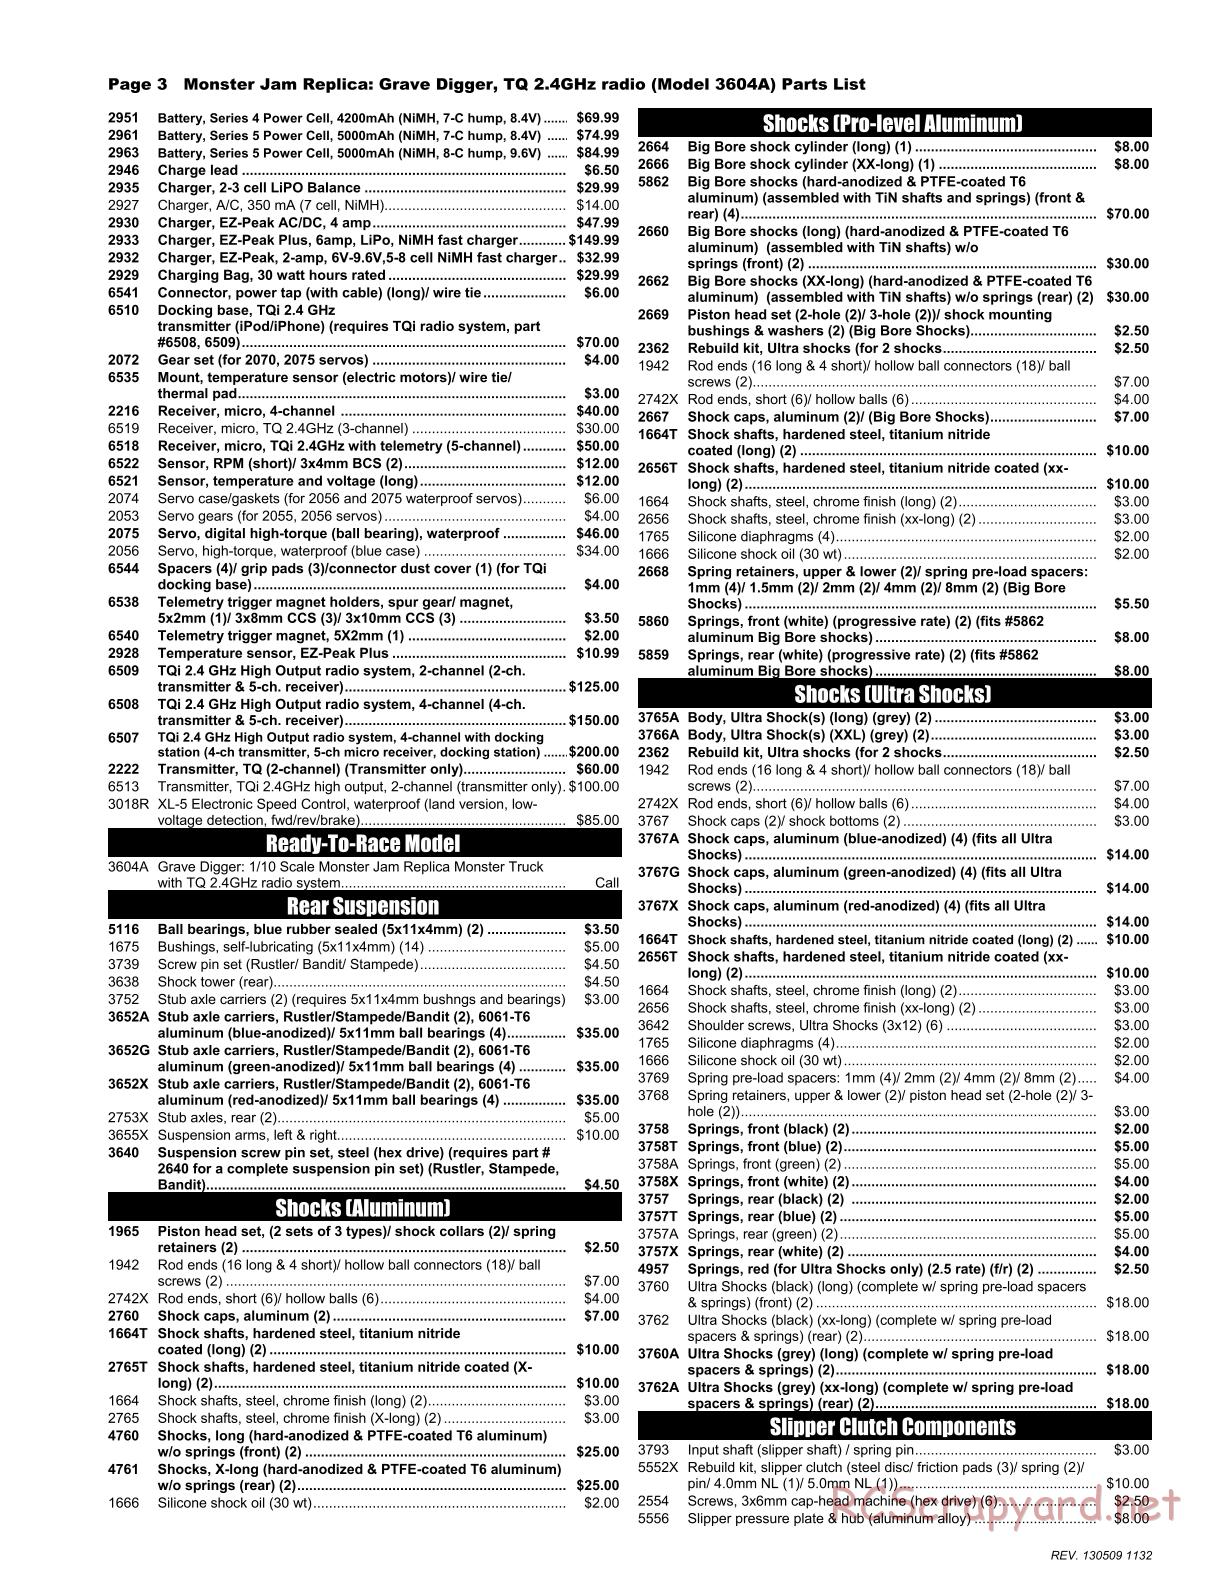 Traxxas - Monster Jam - Grave Digger - Parts List - Page 3